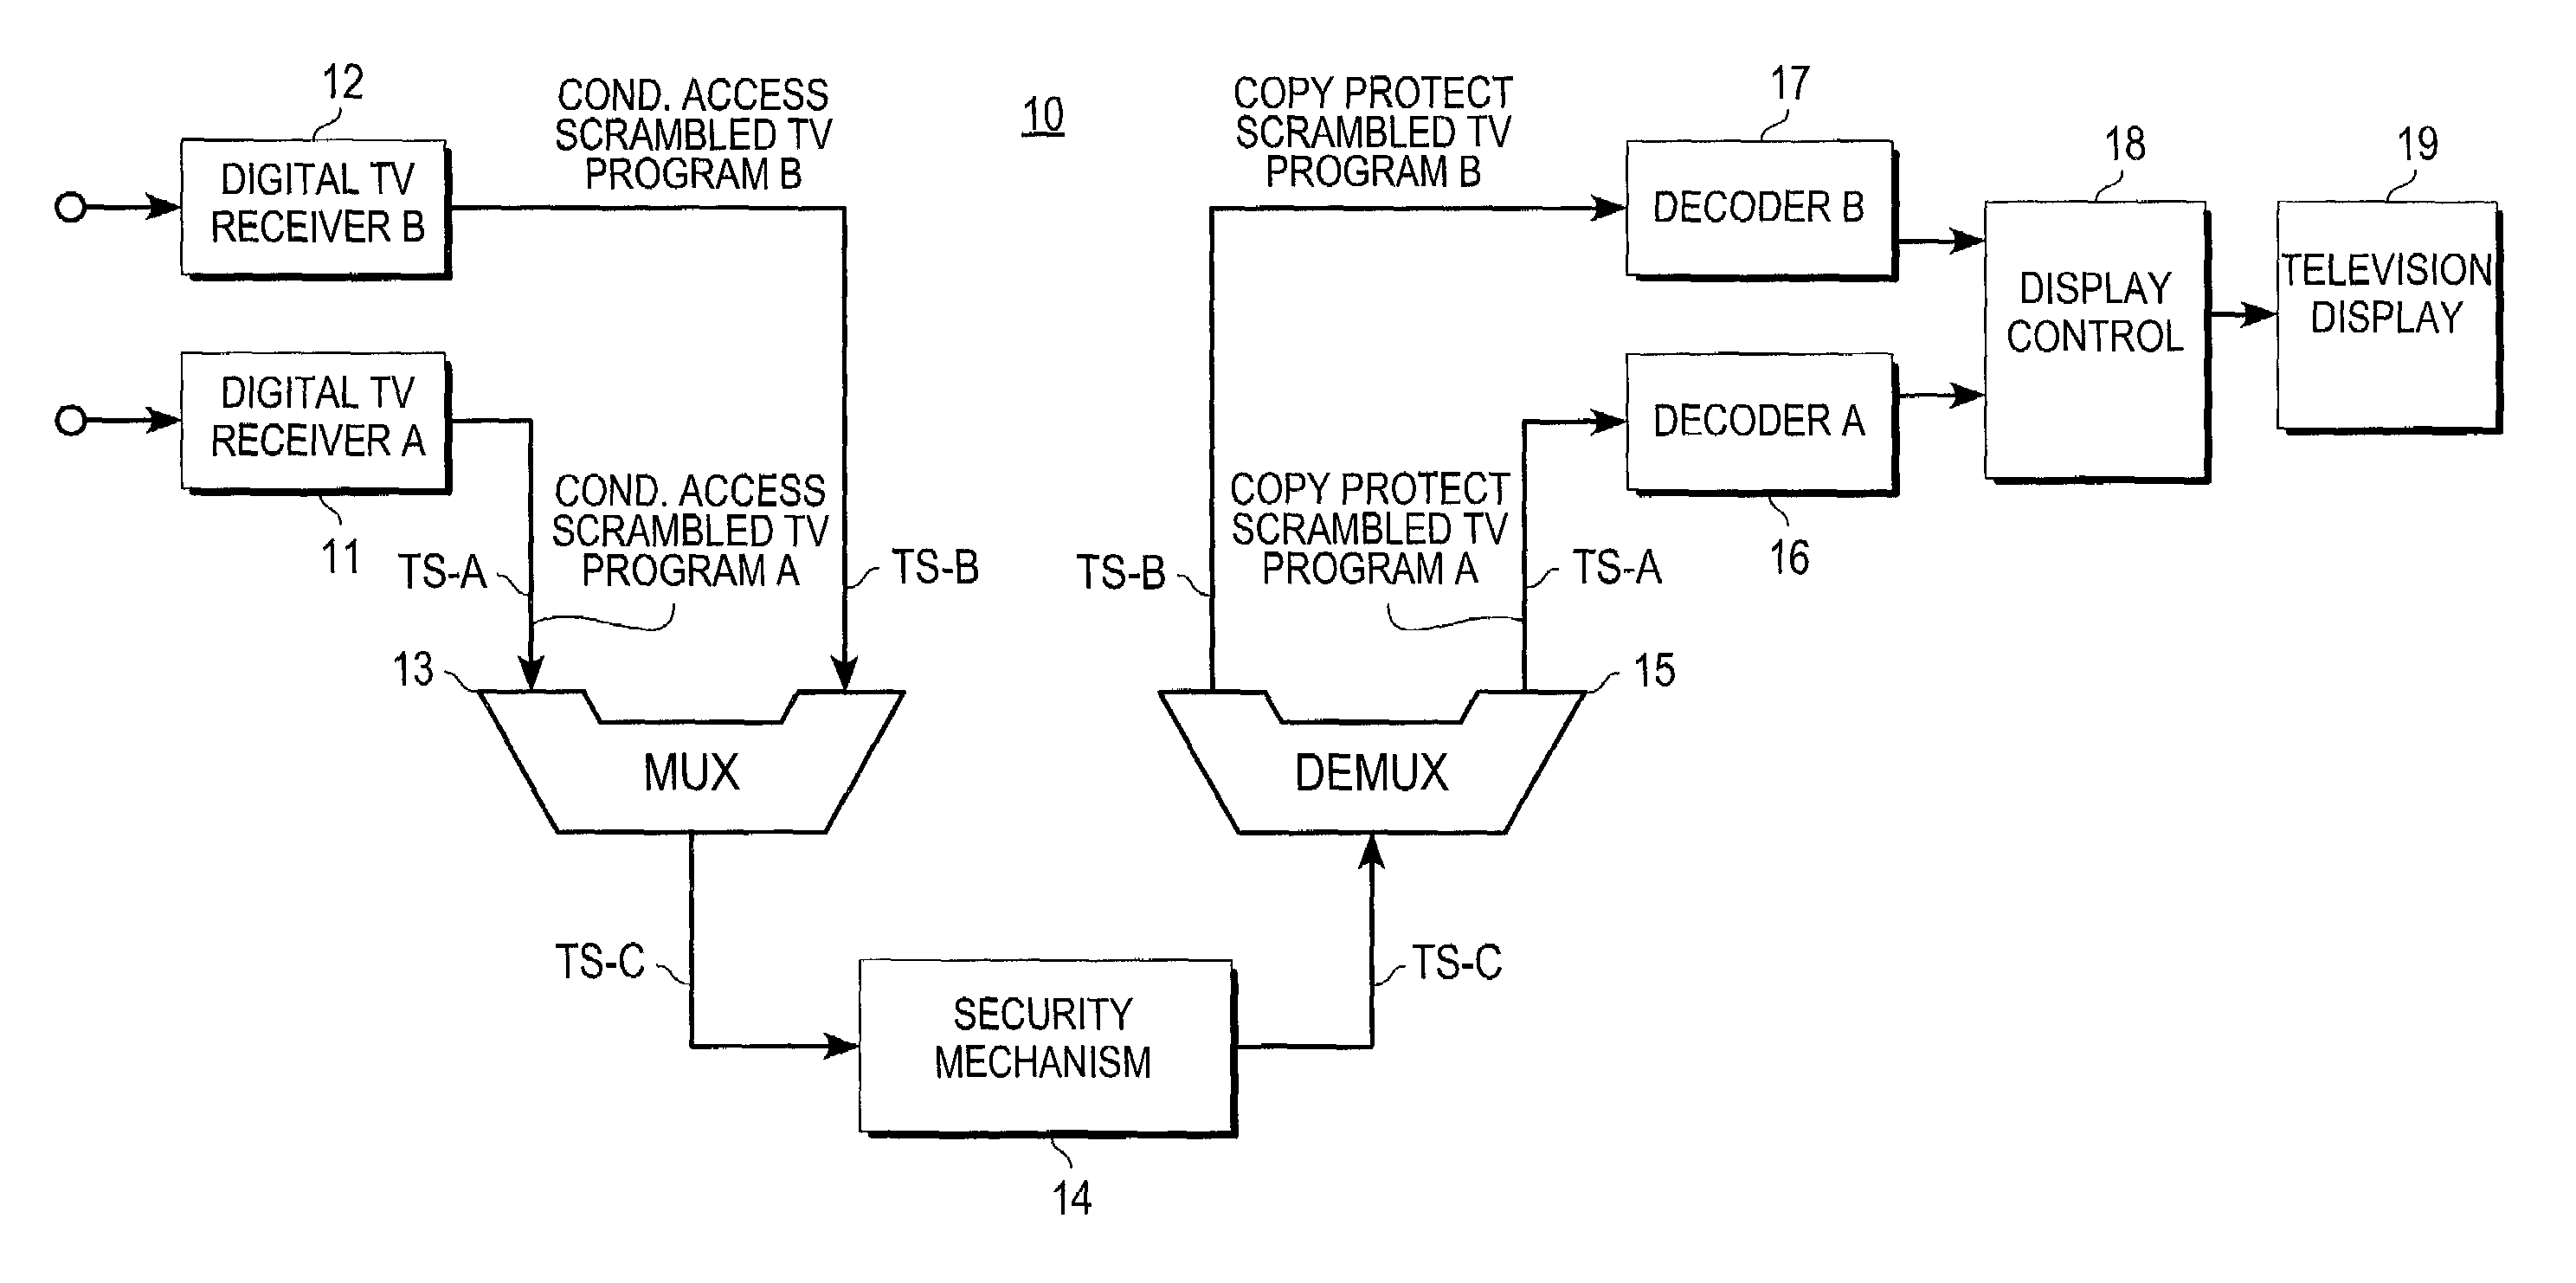 Digital television conditional access methods and apparatus for simultaneously handling multiple television programs